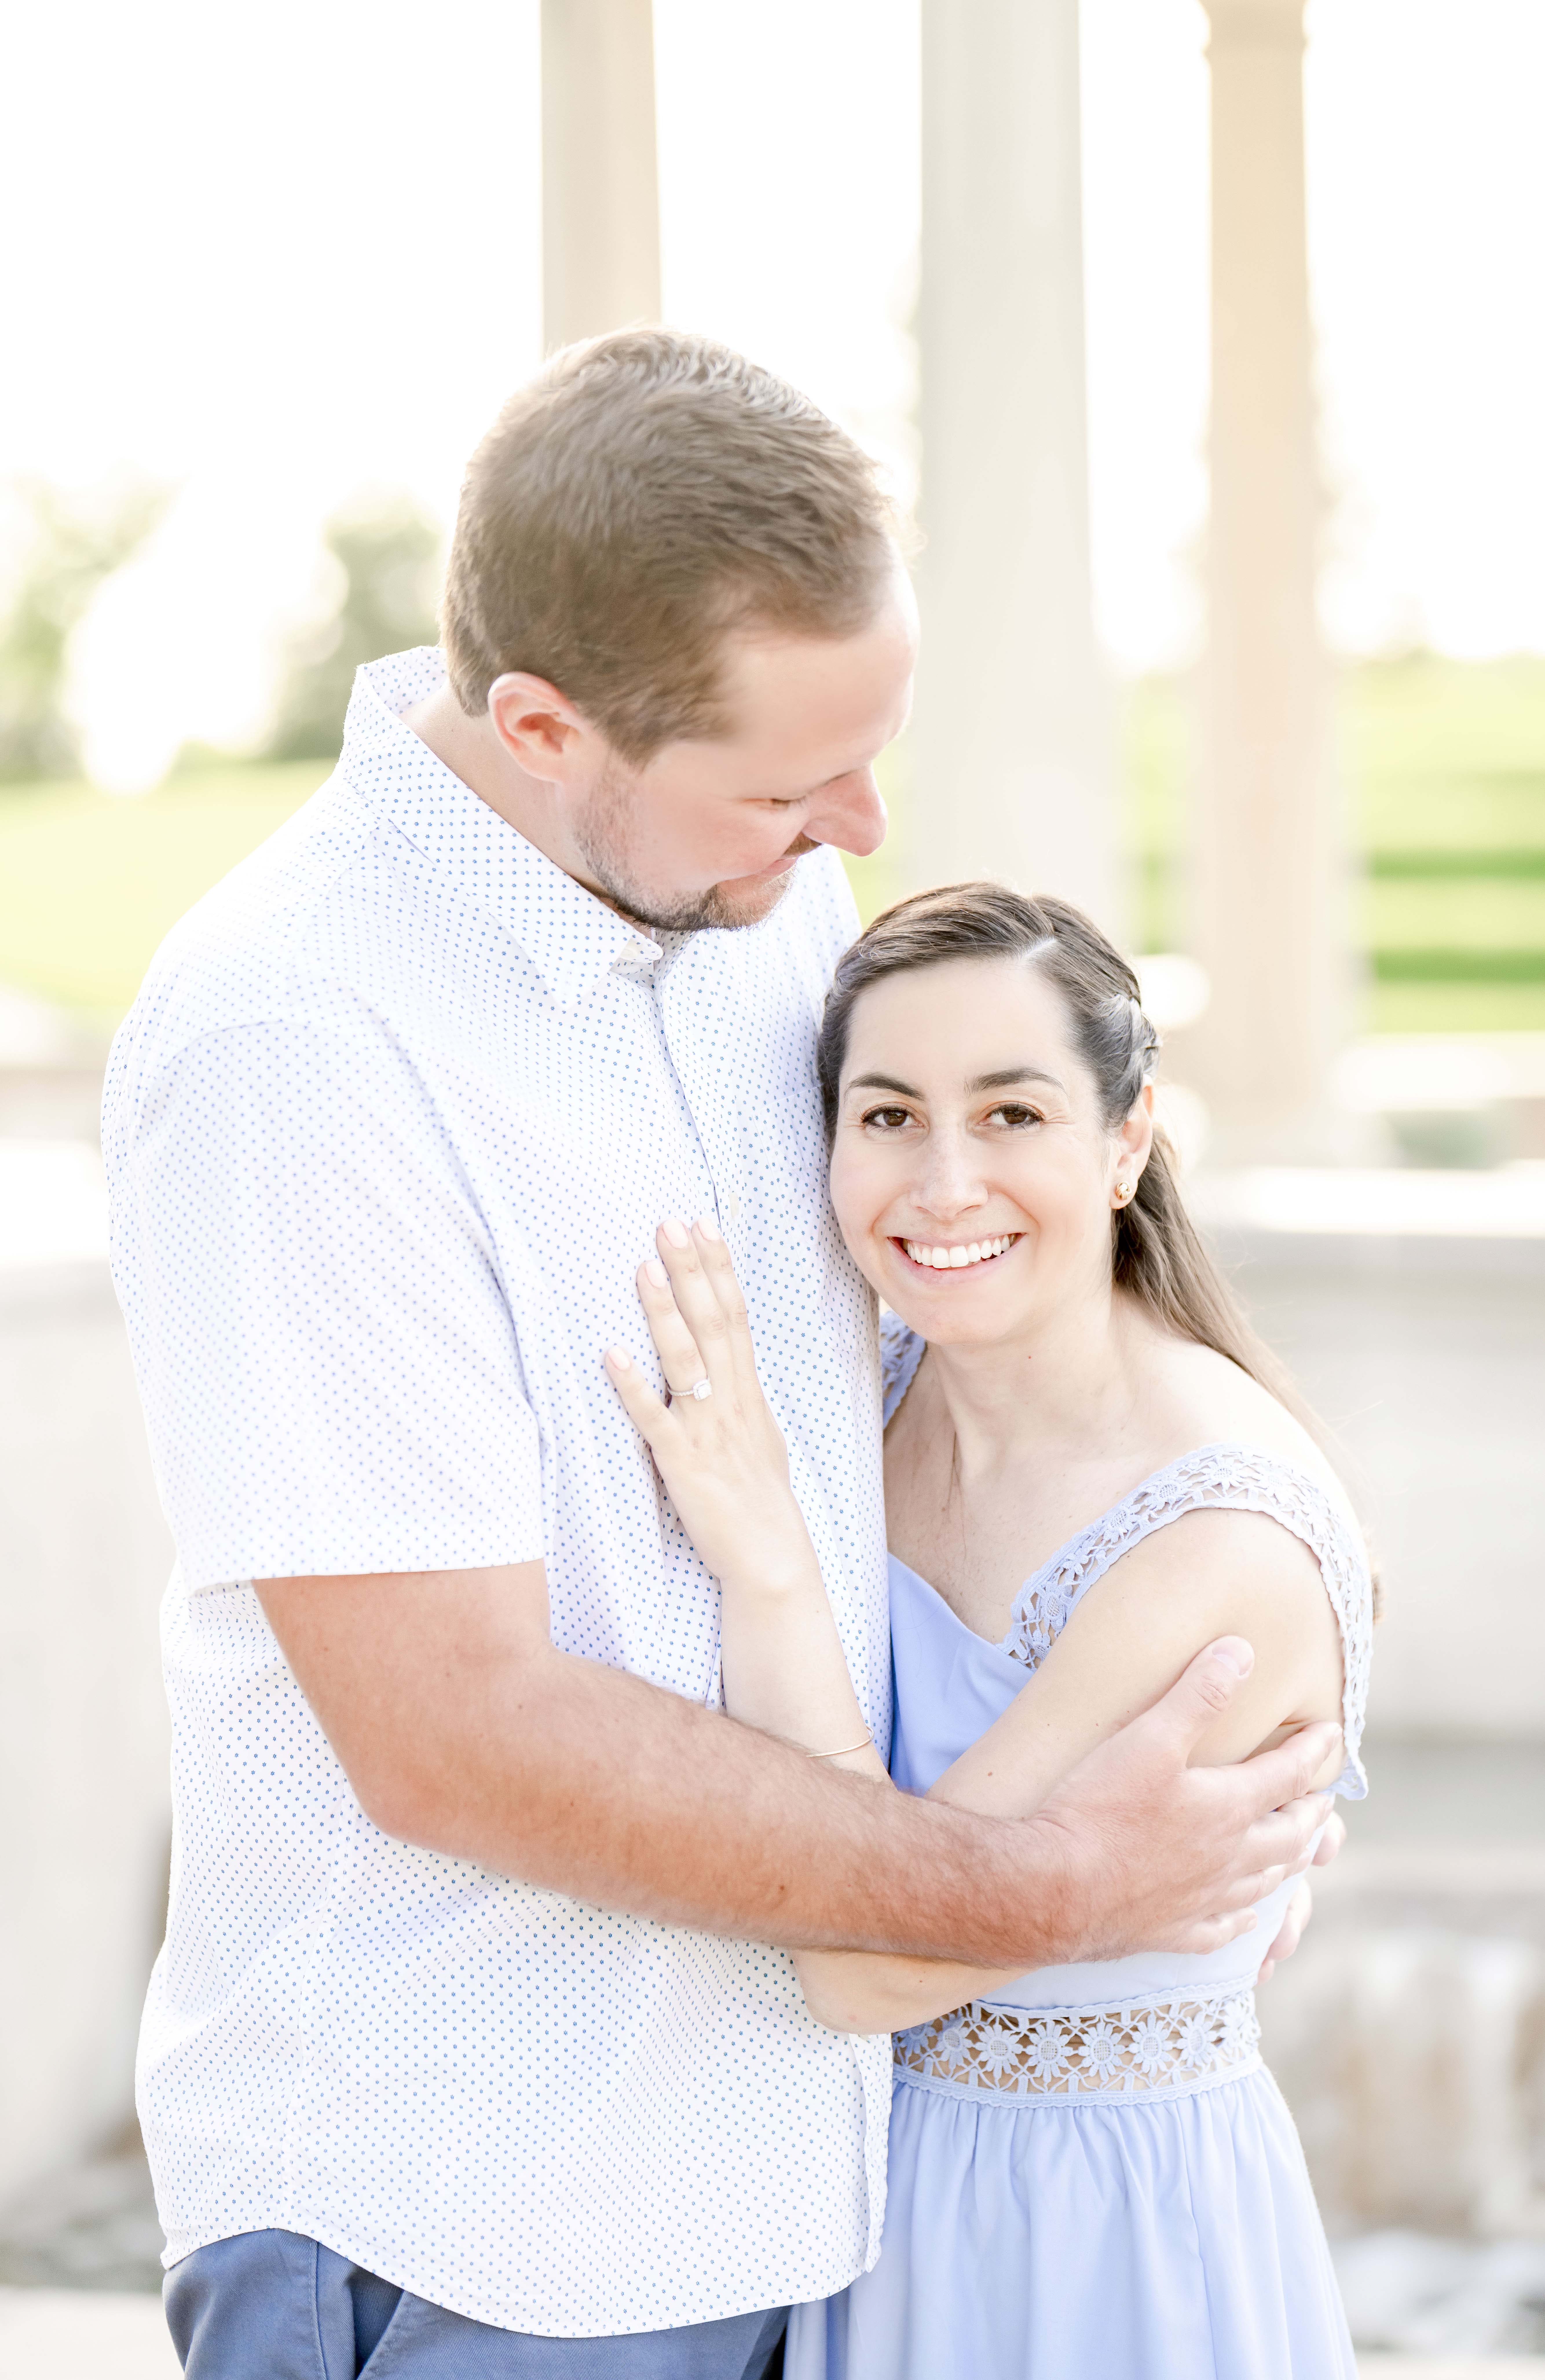 Sunset engagement session at cox hall gardens